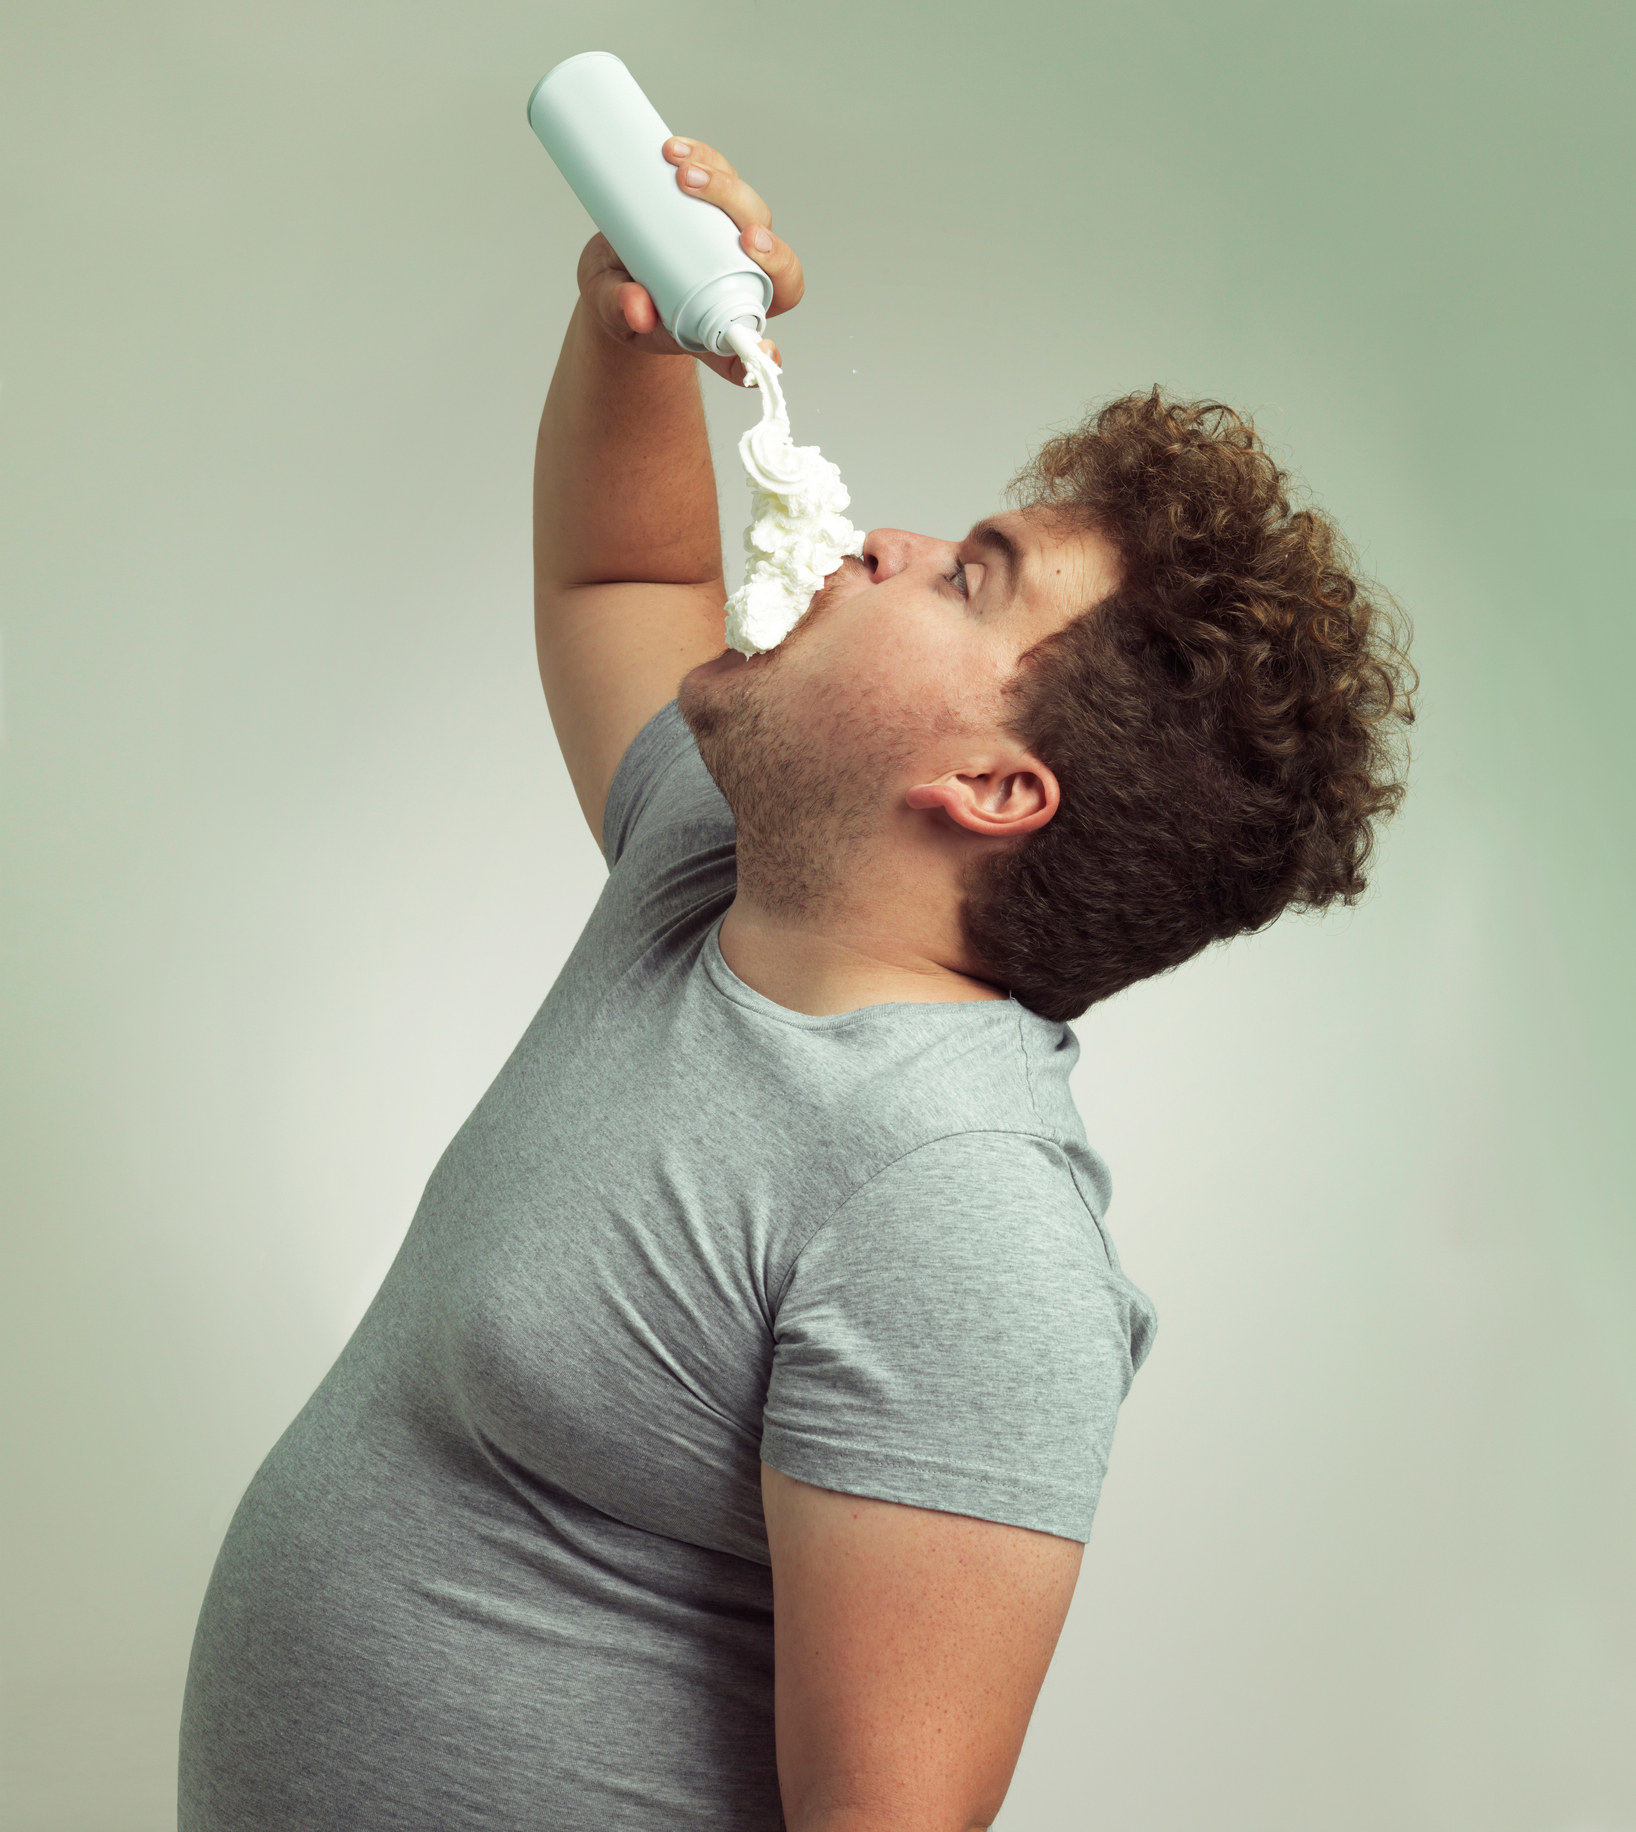 Shot of a man filling his mouth with whipped cream